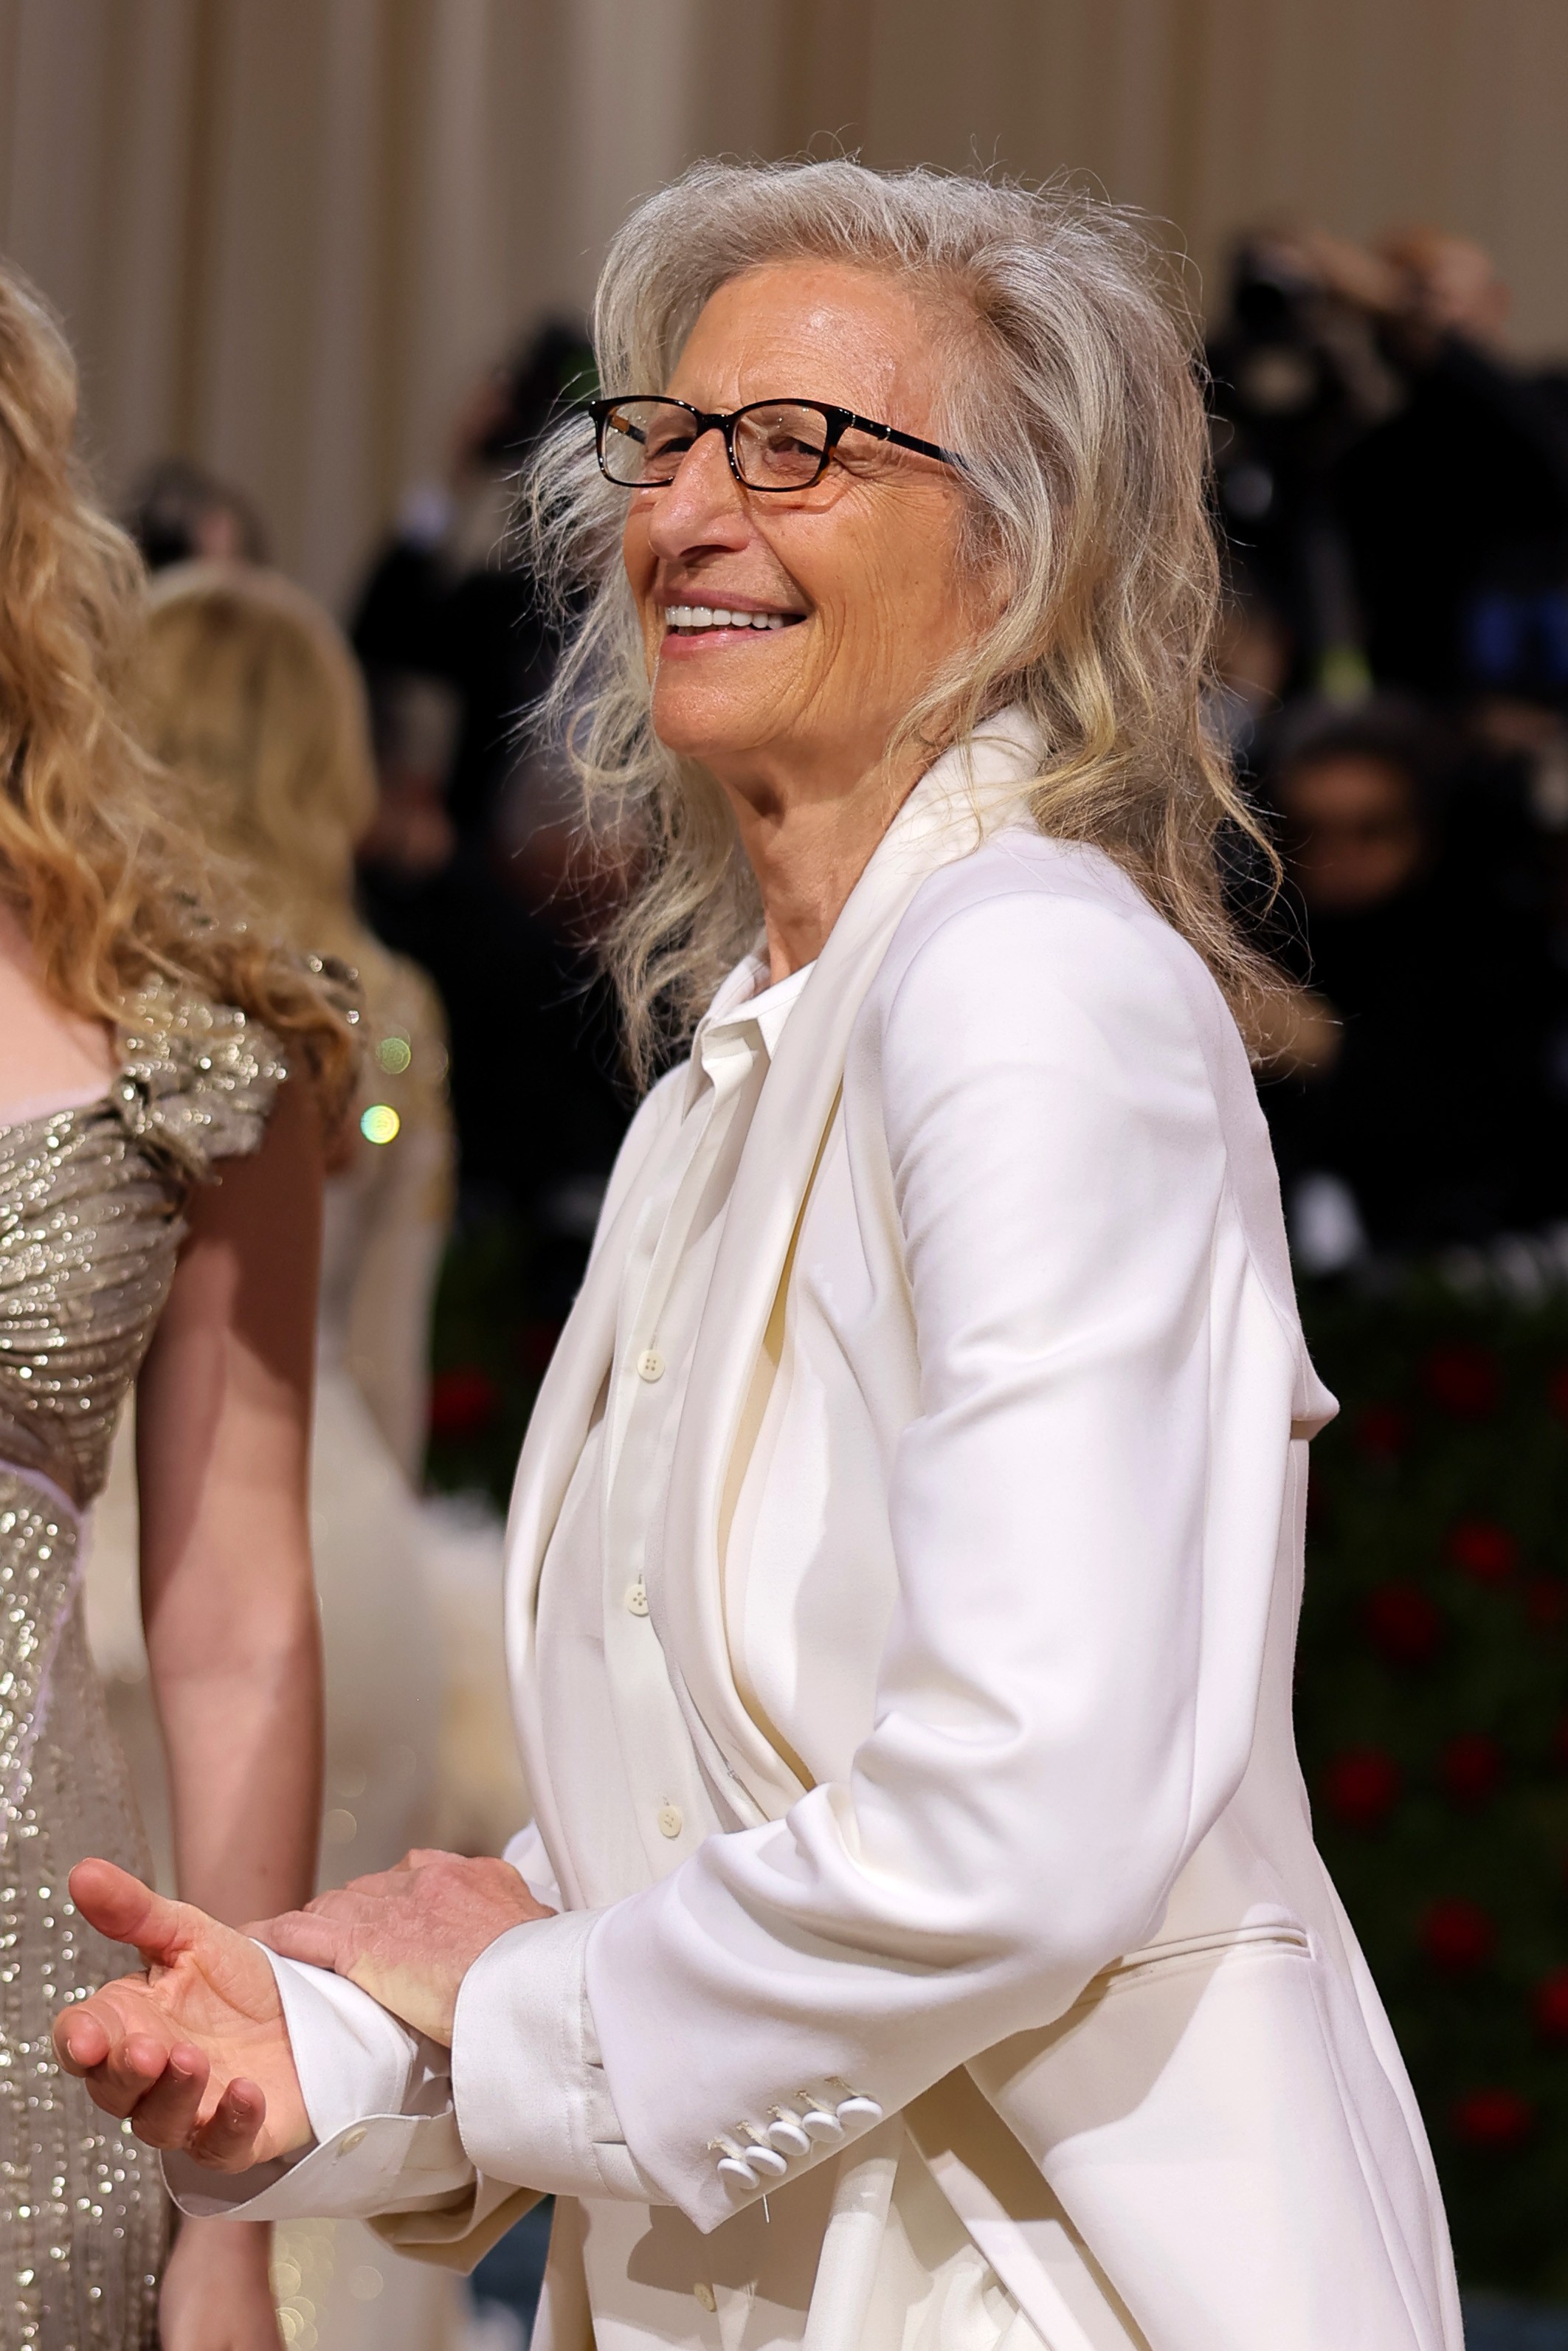 NEW YORK, NEW YORK - MAY 02: Annie Leibovitz attends The 2022 Met Gala Celebrating "In America: An Anthology of Fashion" at The Metropolitan Museum of Art on May 02, 2022 in New York City. (Photo by Mike Coppola/Getty Images) (Foto: Getty Images)